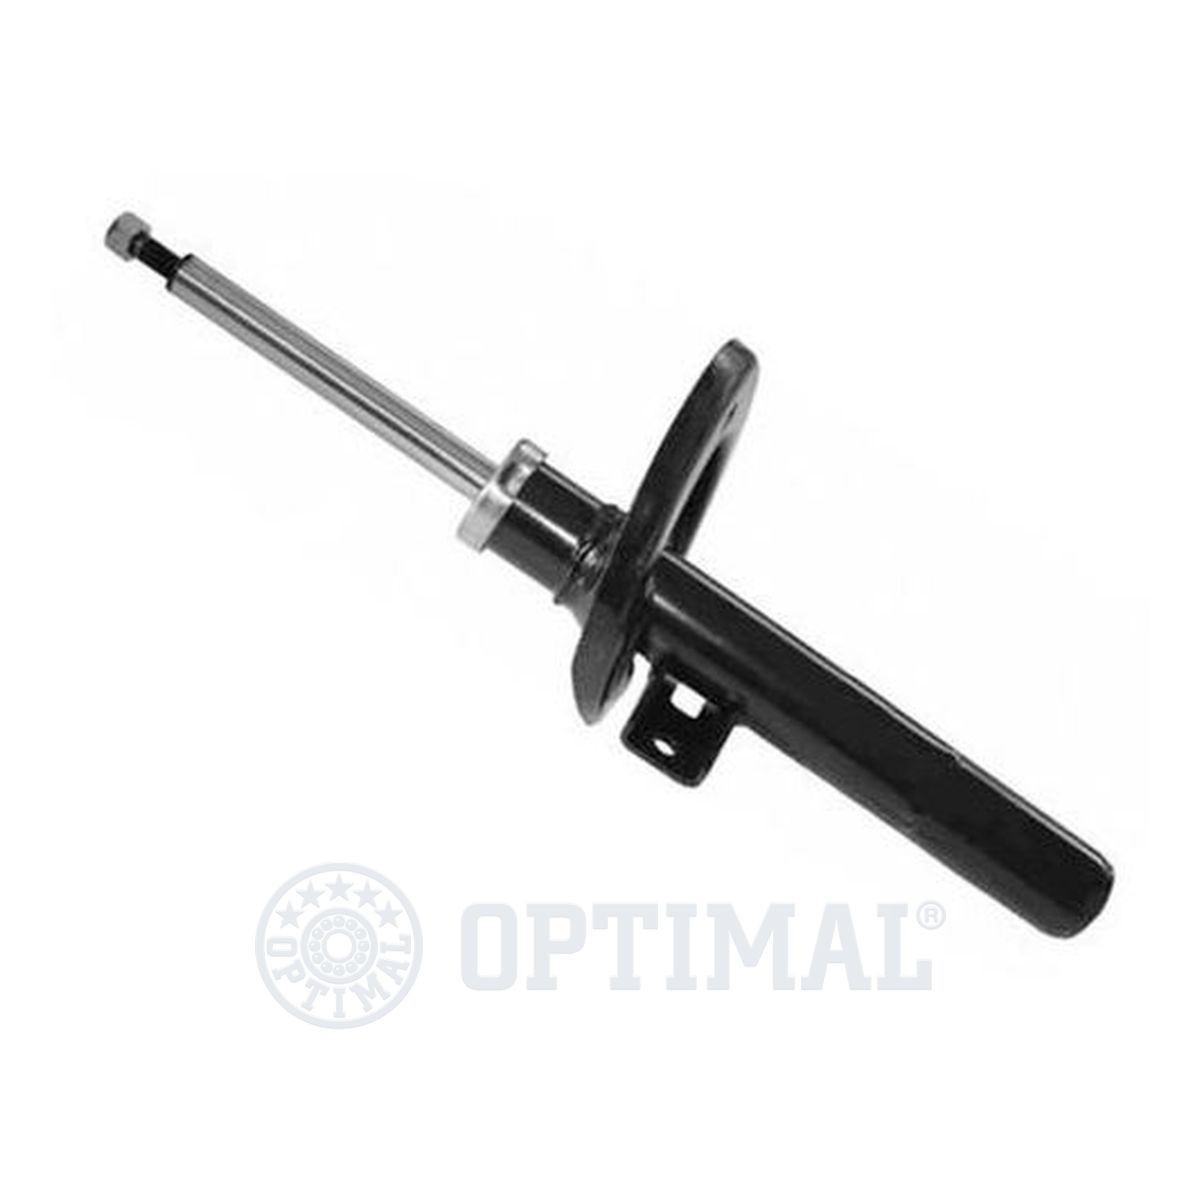 OPTIMAL A-3606G Shock absorber VW experience and price